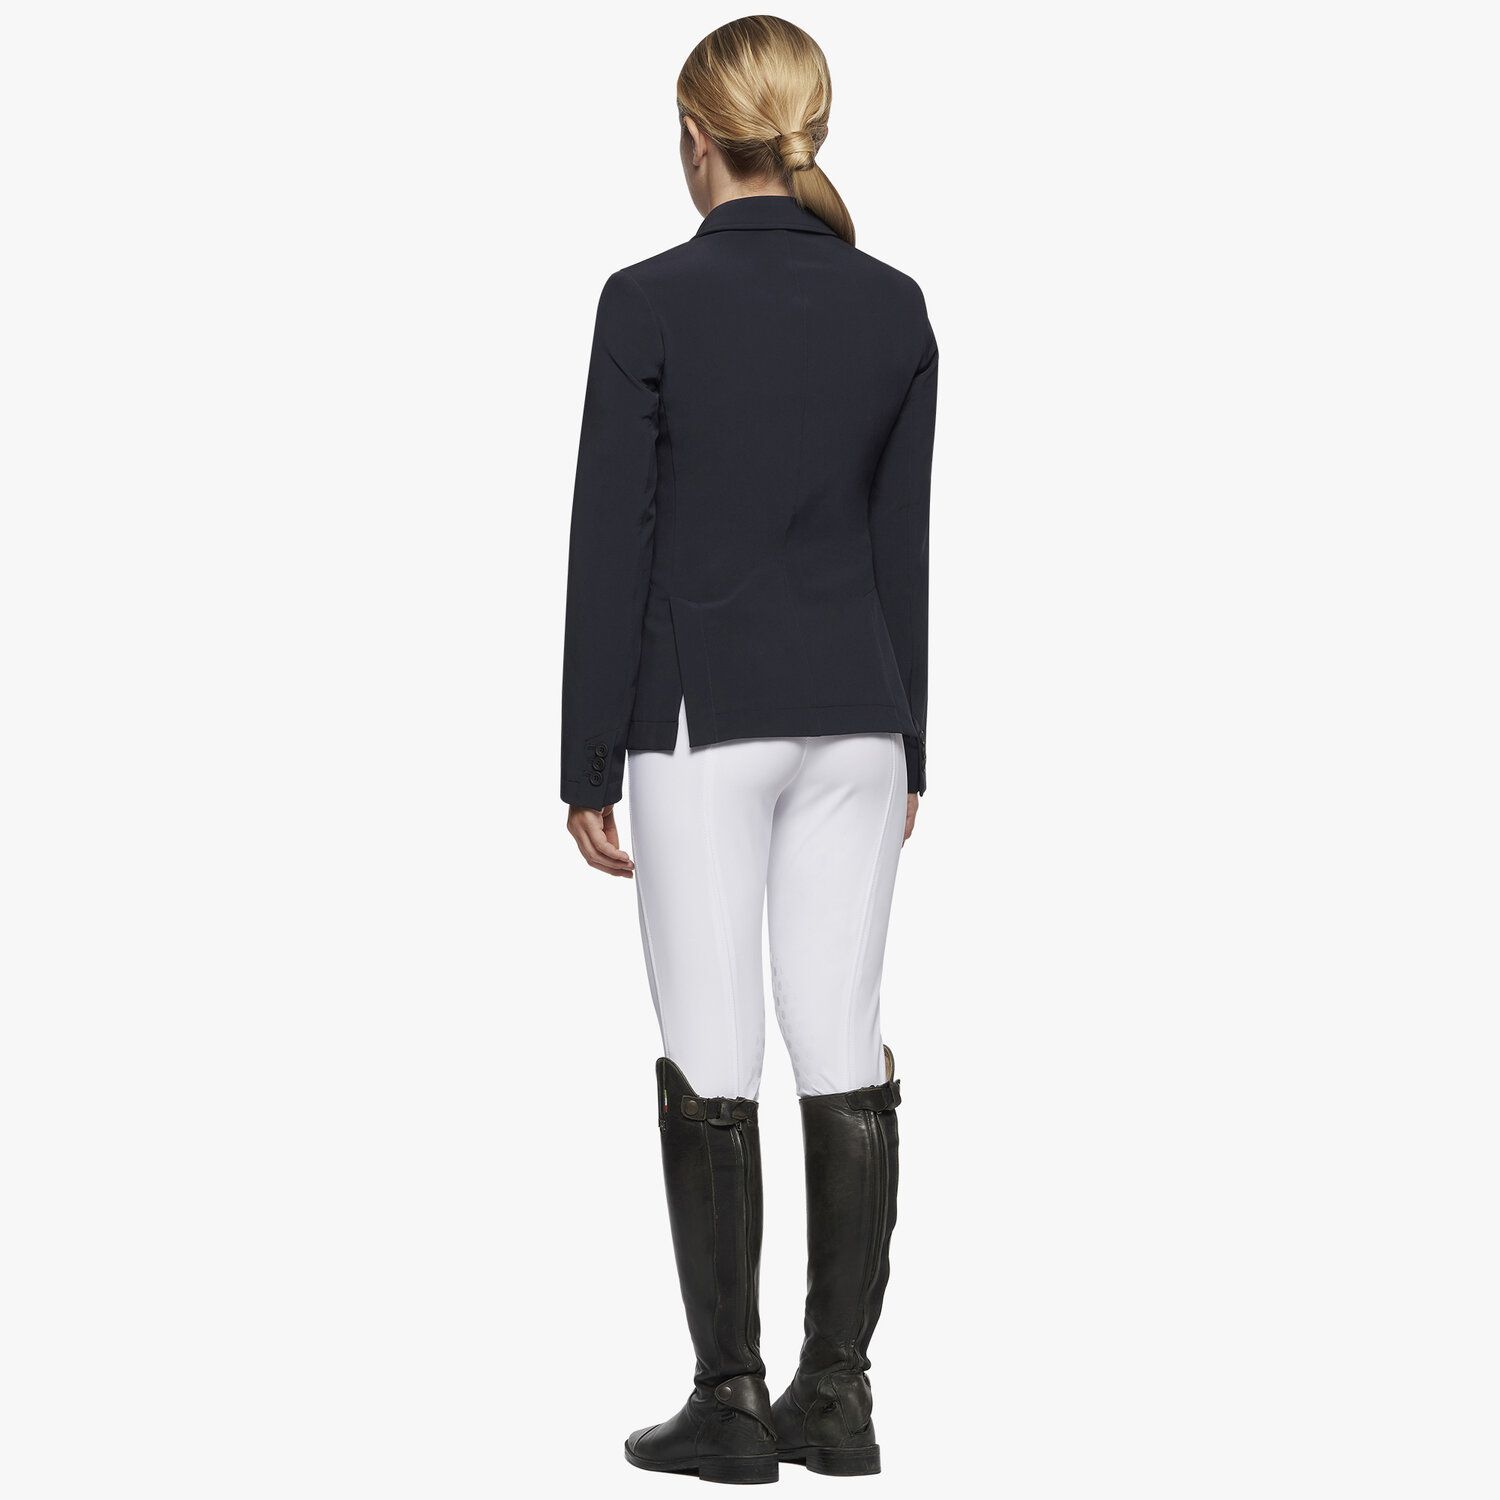 Cavalleria Toscana FISE Girl's competition jacket with alcantara collar FISE NAVY-3